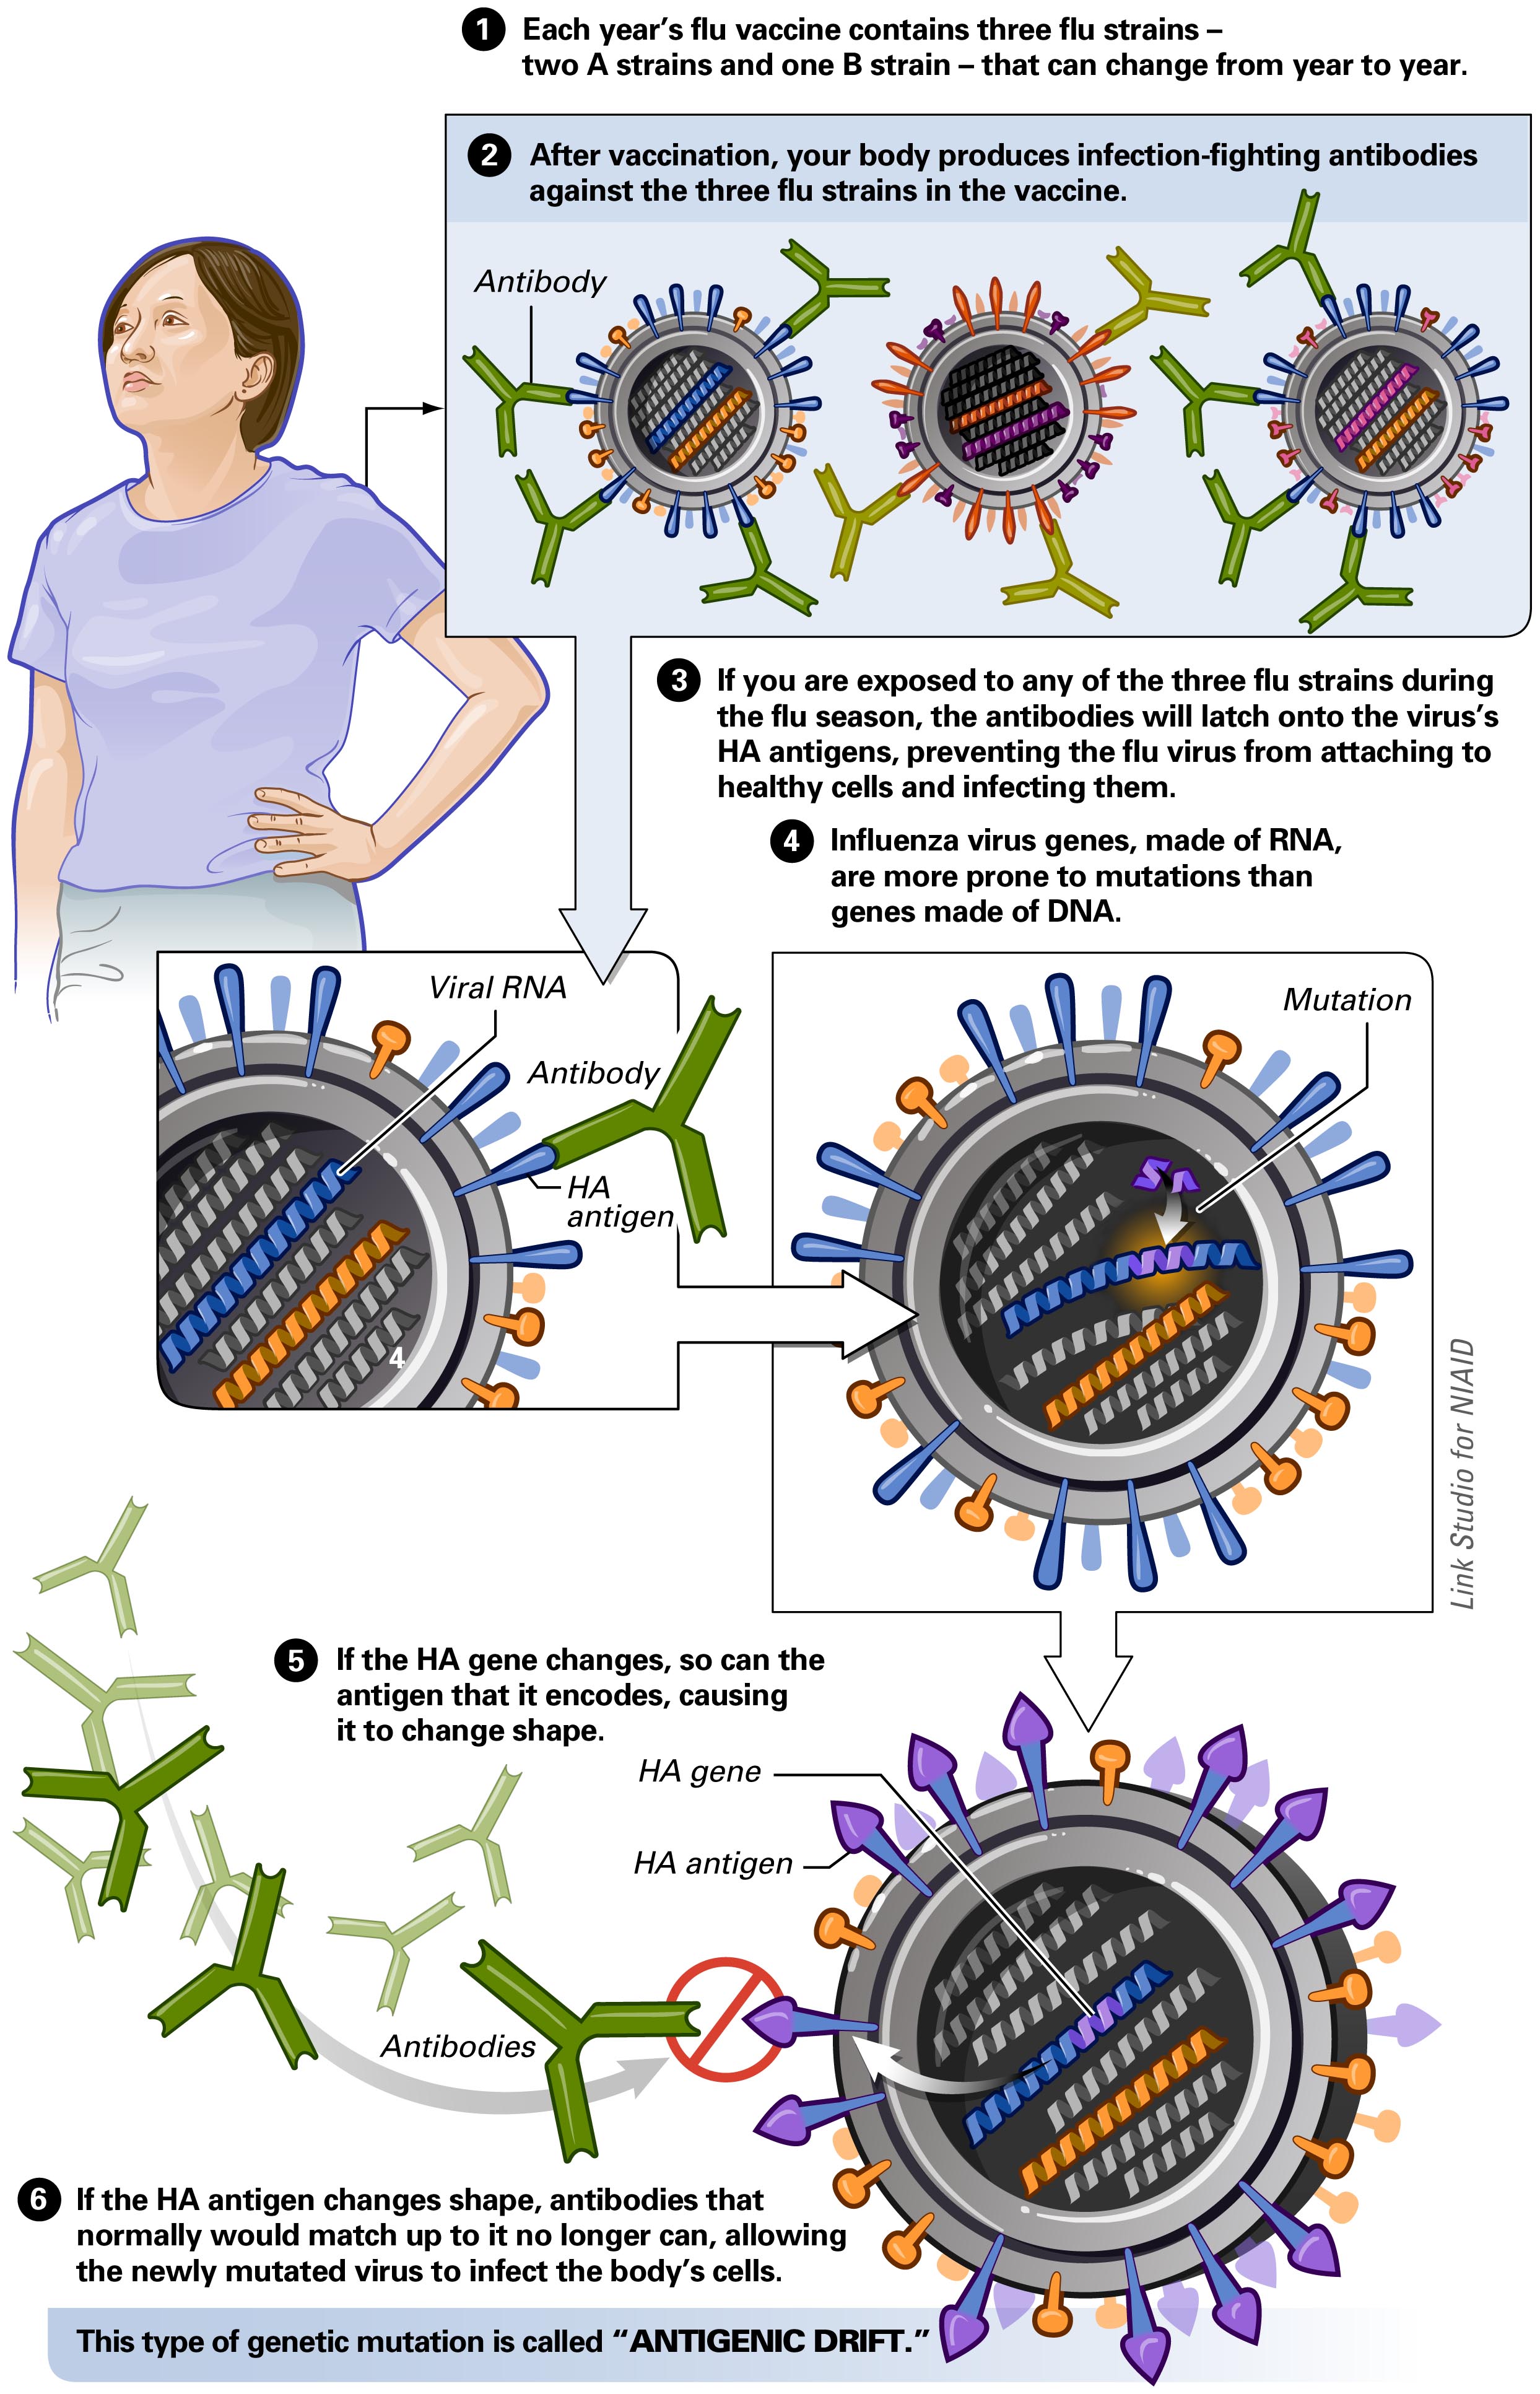 Antigenic Drift Click on the image to expand. Image courtesy of the National Institute of Allergy and Infectious Diseases (NIAID) [1]